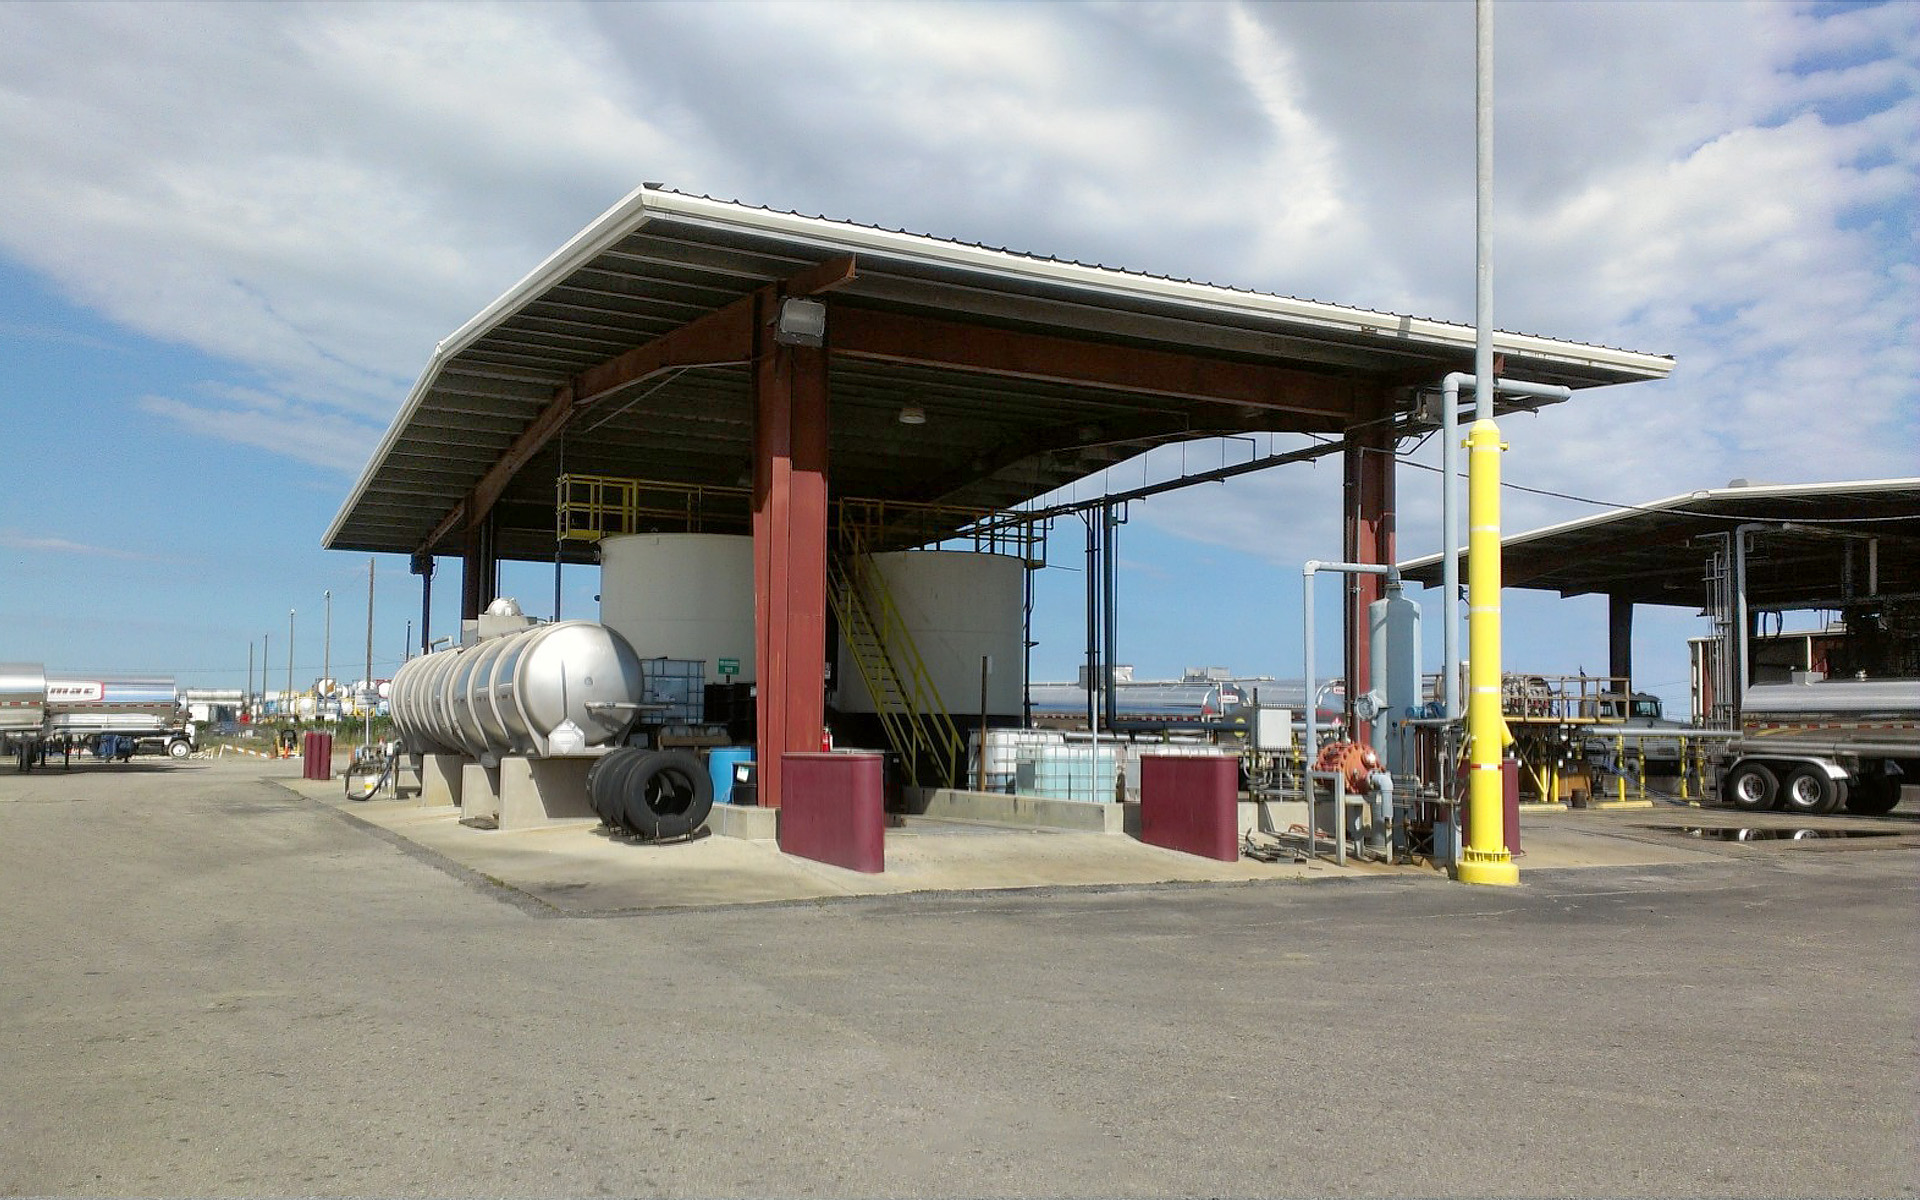 A typical Trimac terminal includes fueling, tank car cleaning, and facilities ranging from maintenance to storage tank farms.